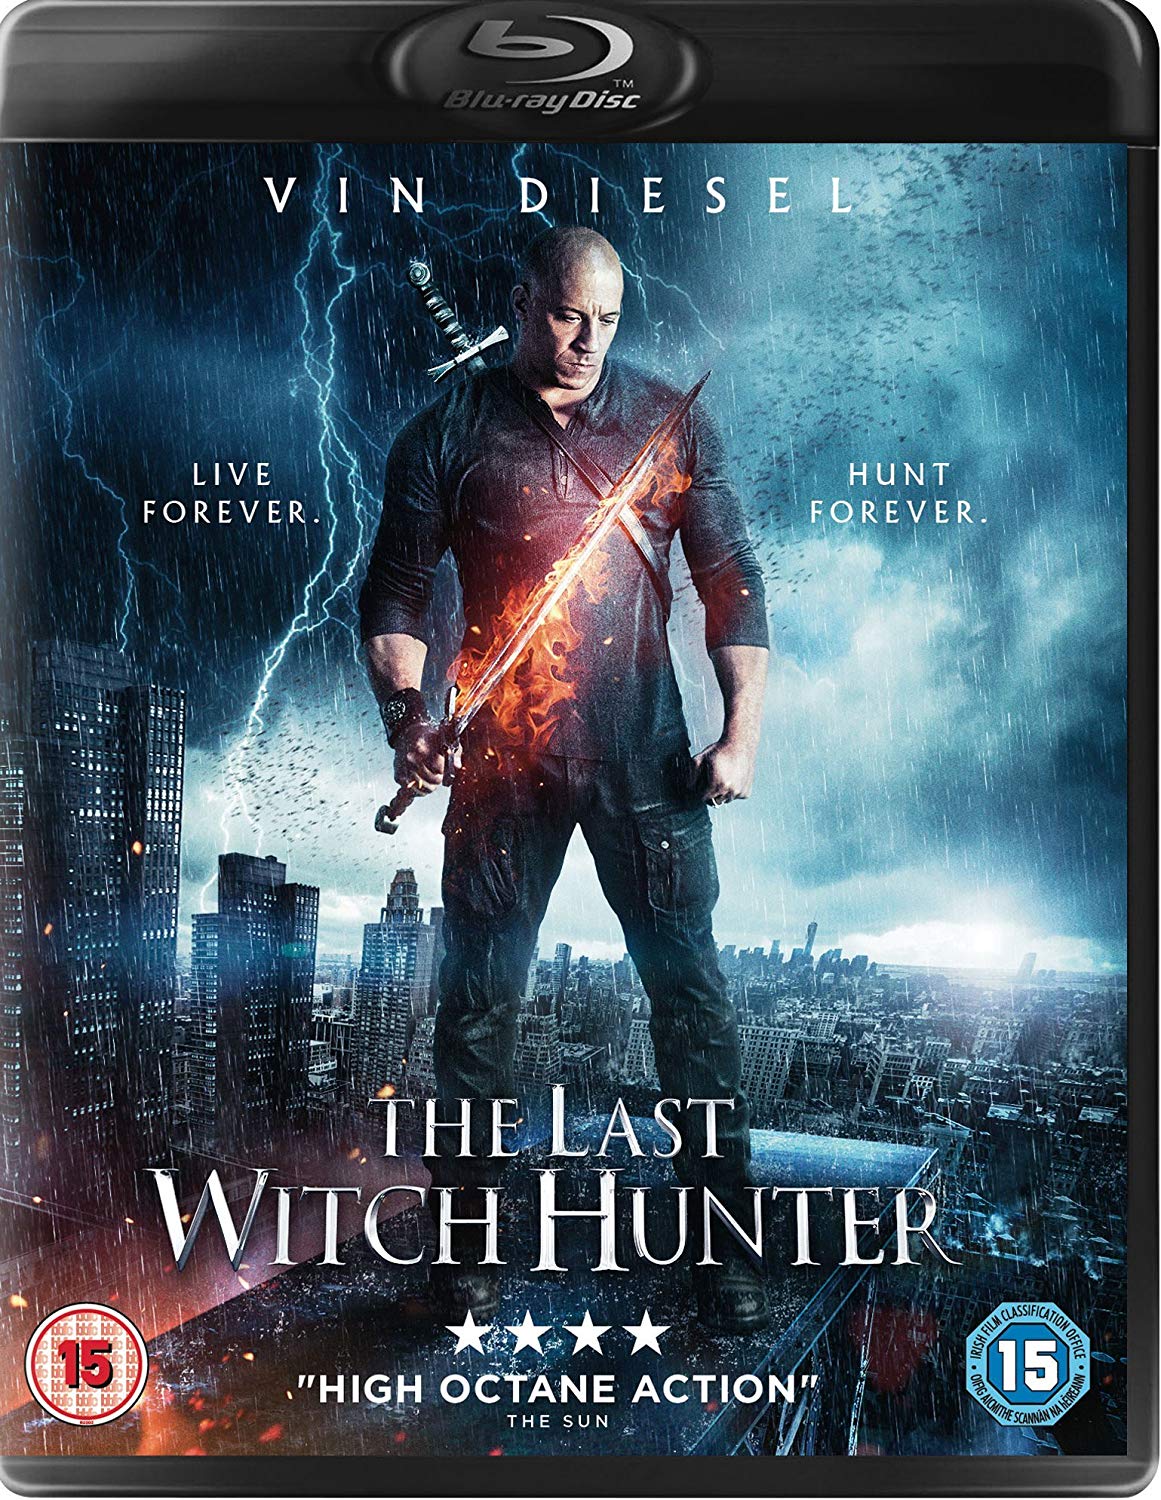 The Last Witch Hunter (English) film english subtitles  for movie